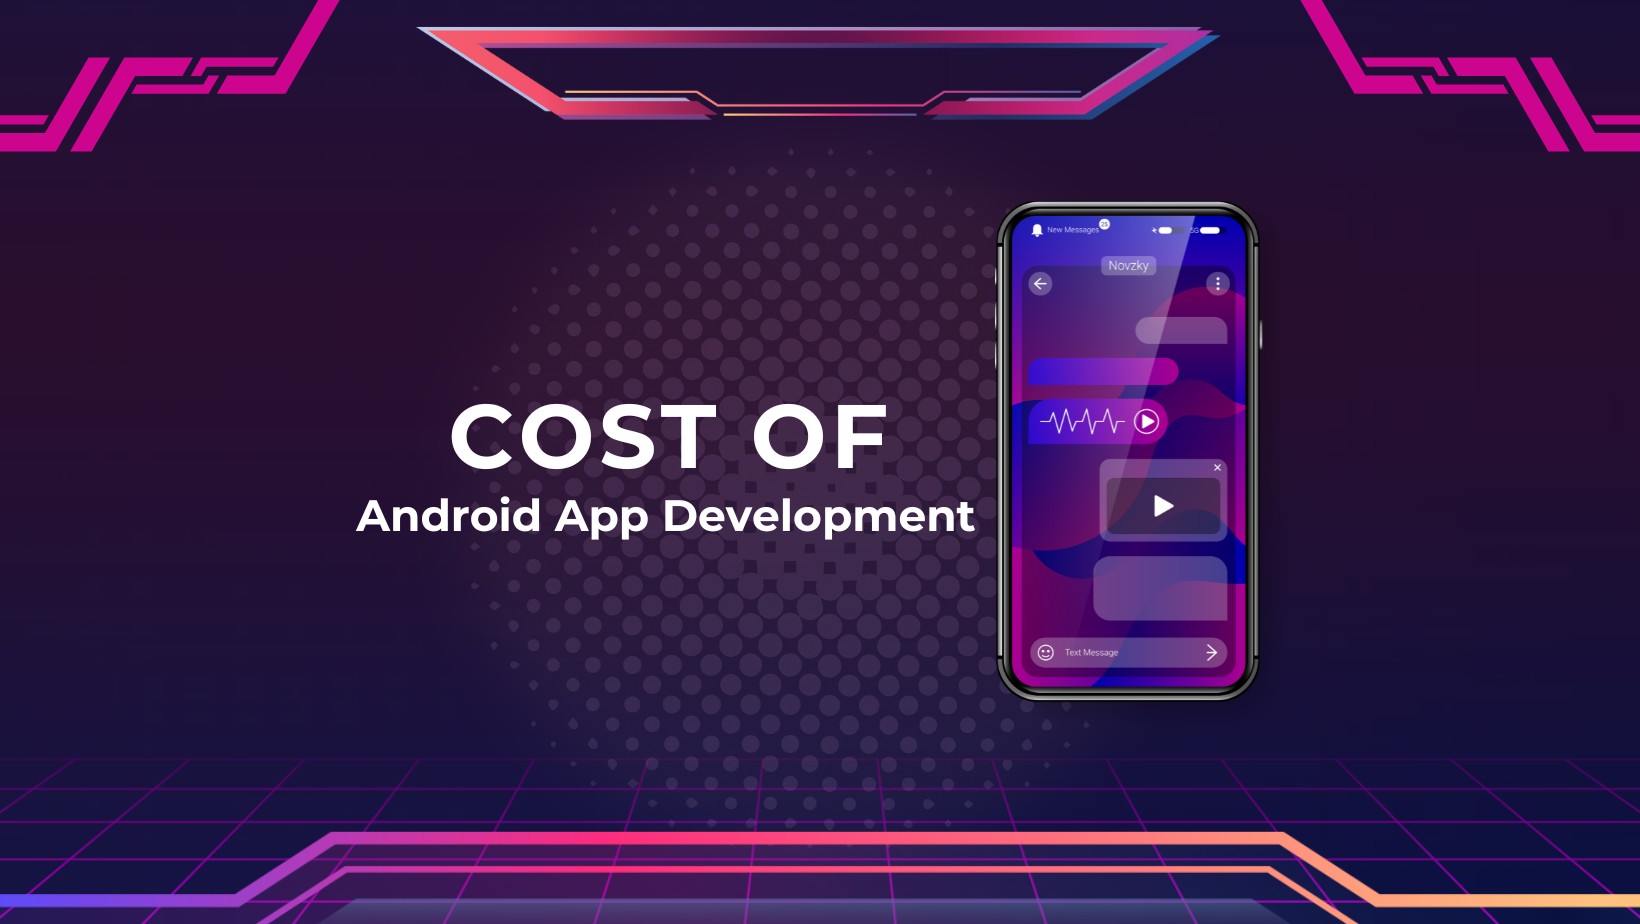 What is the Cost of Android App Development in India?